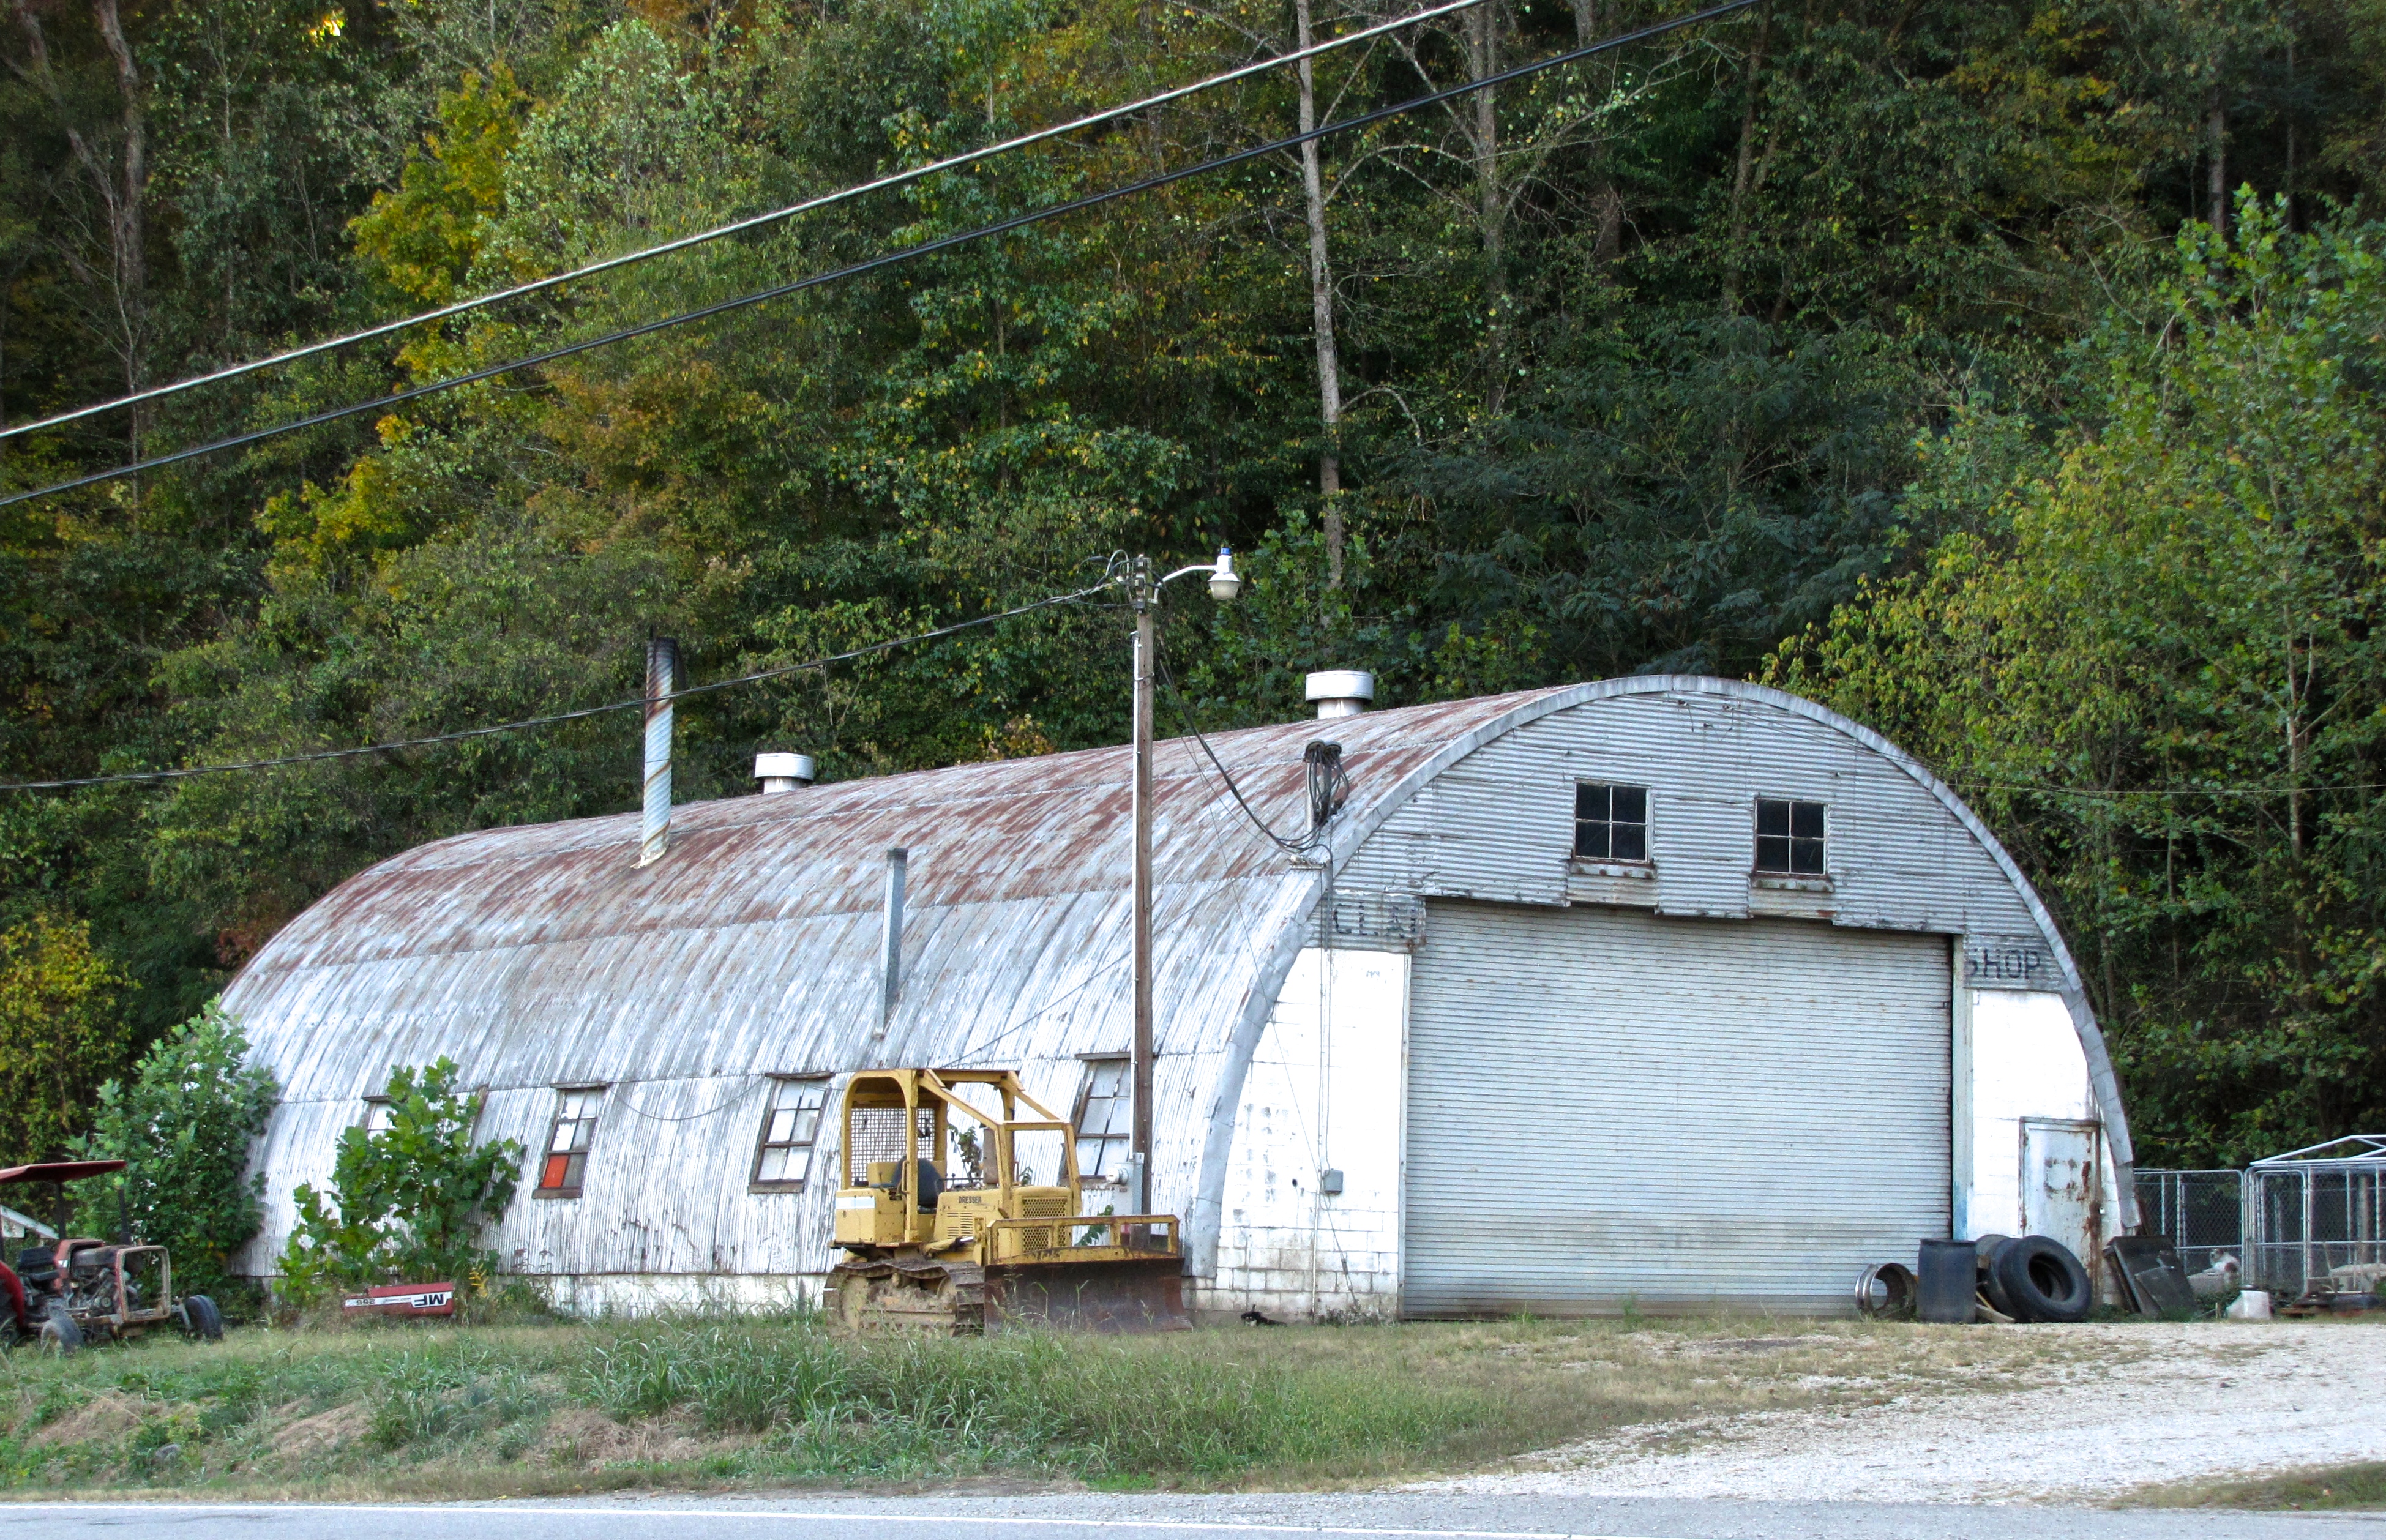 quonset hut in Terms Of Service, ME